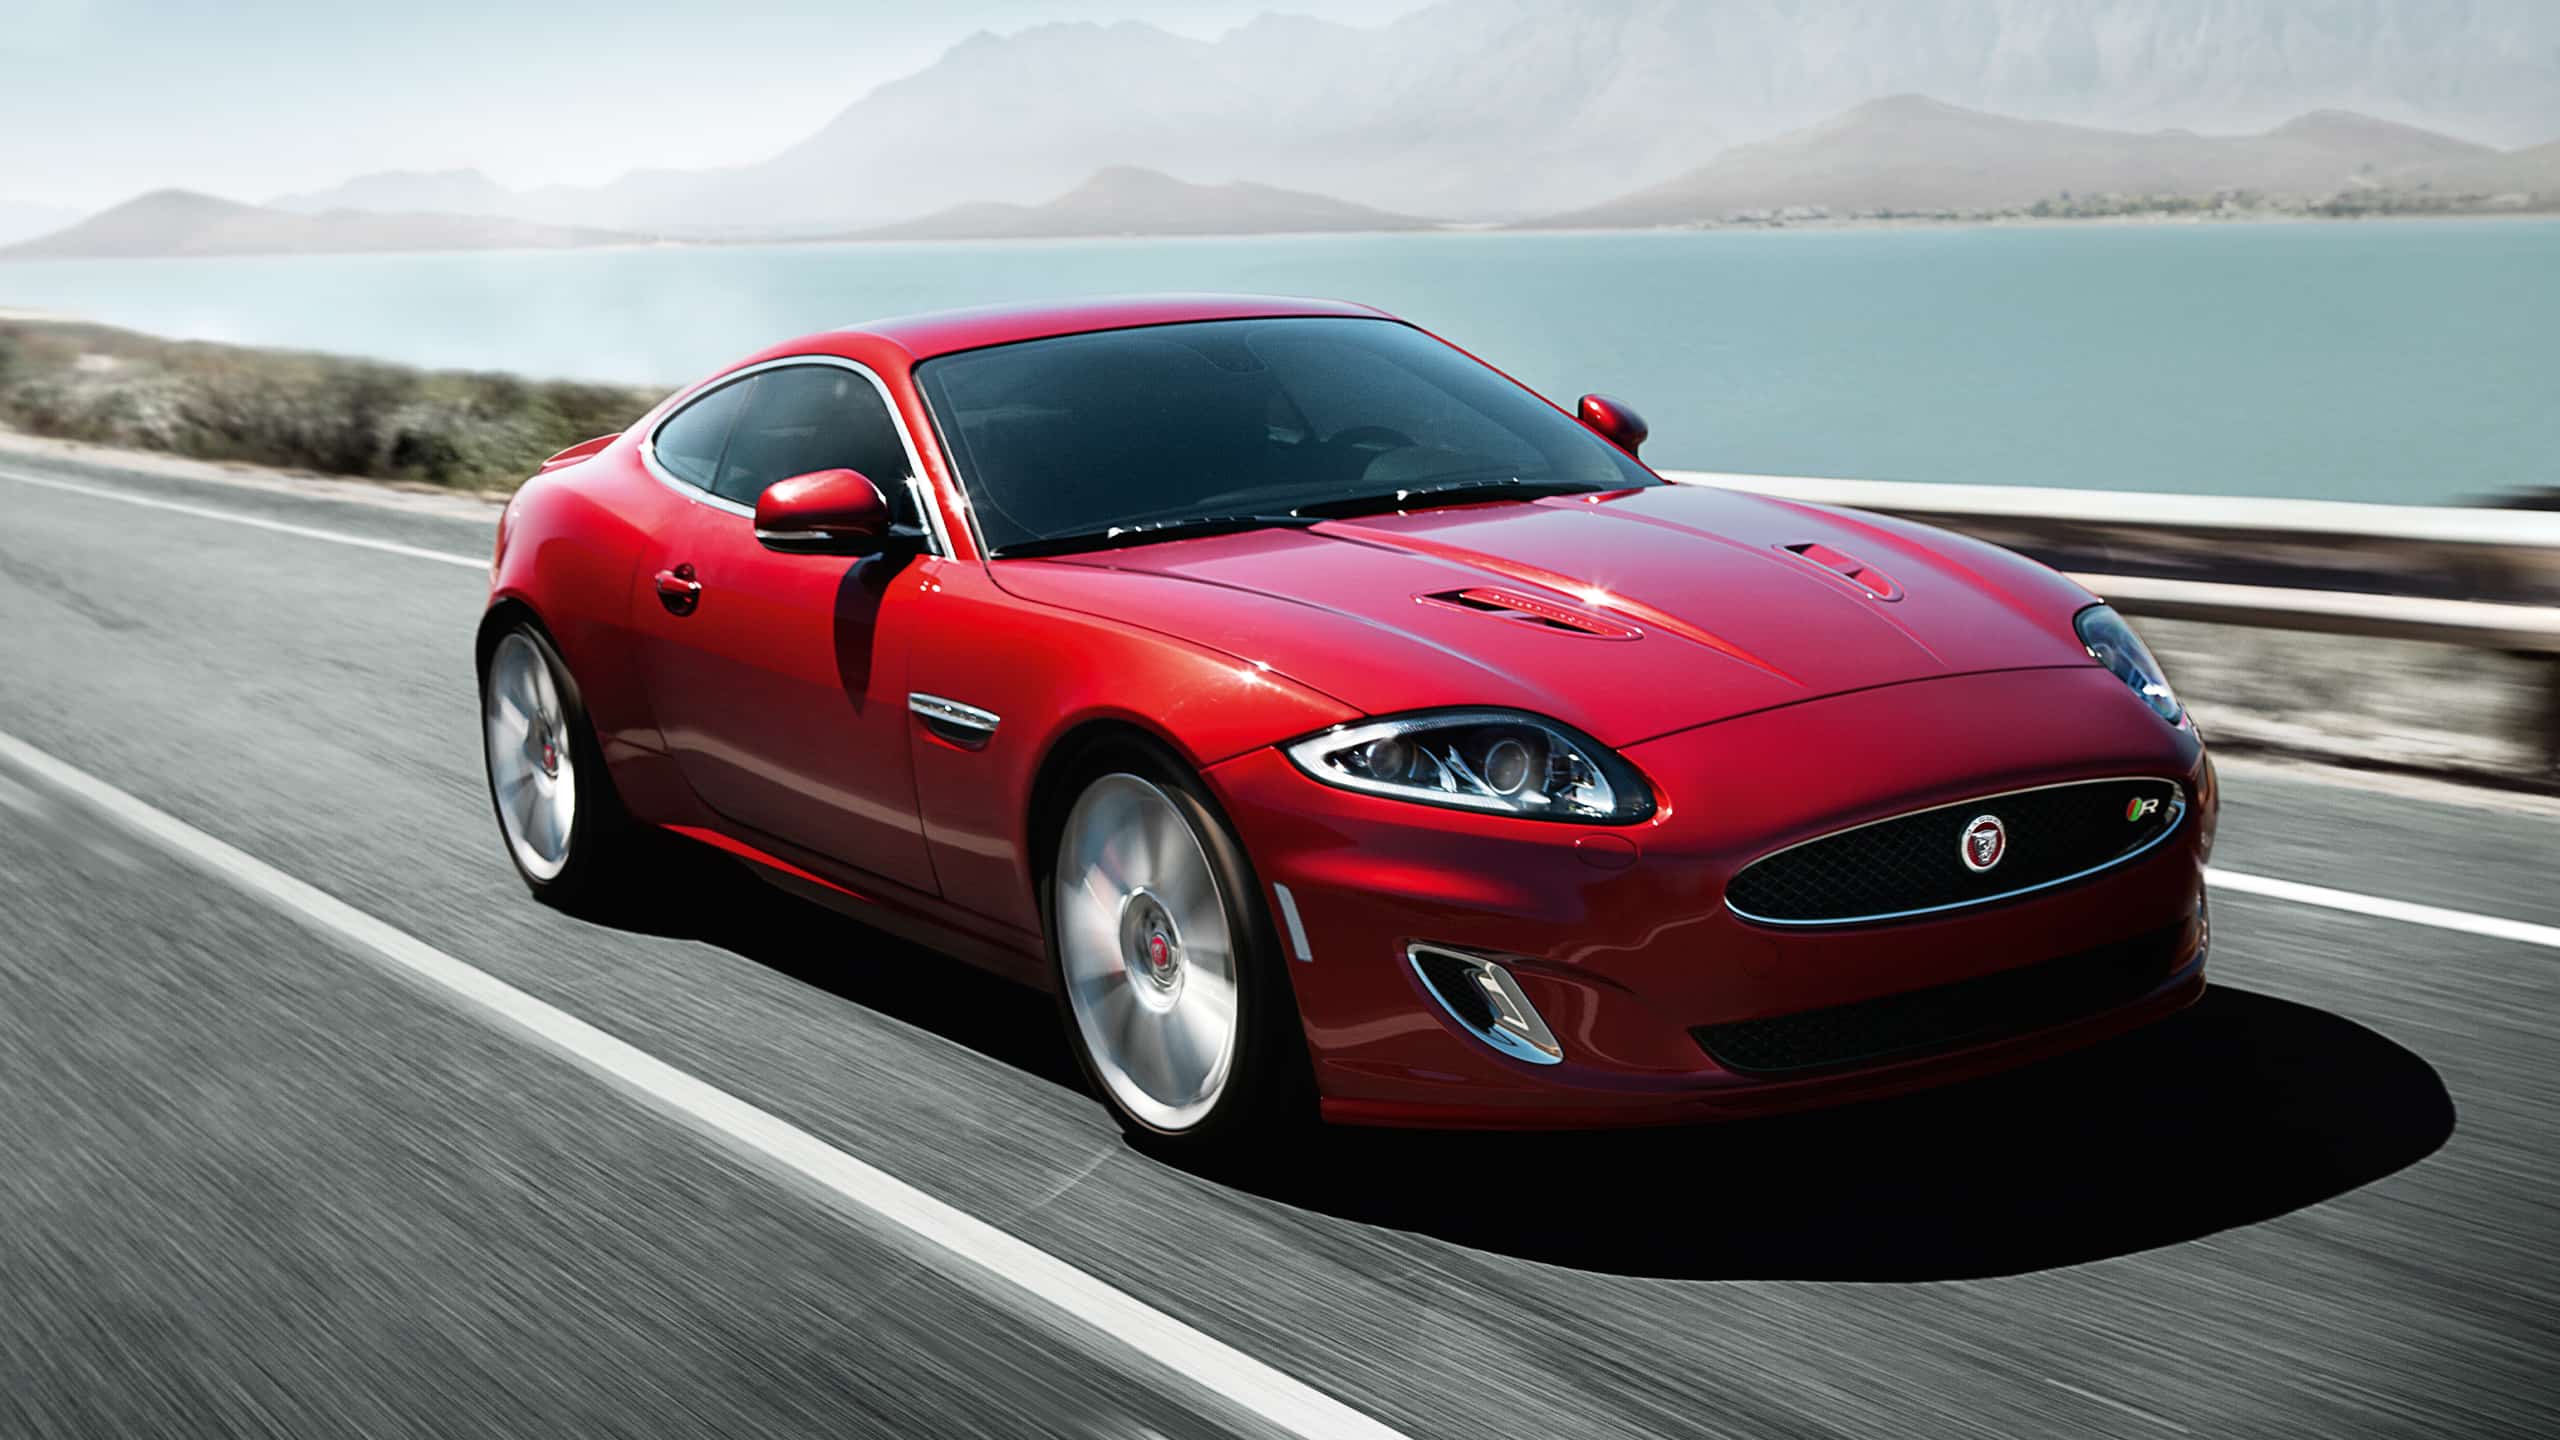 Jaguar XK running on bridge connected with Sea and mountains